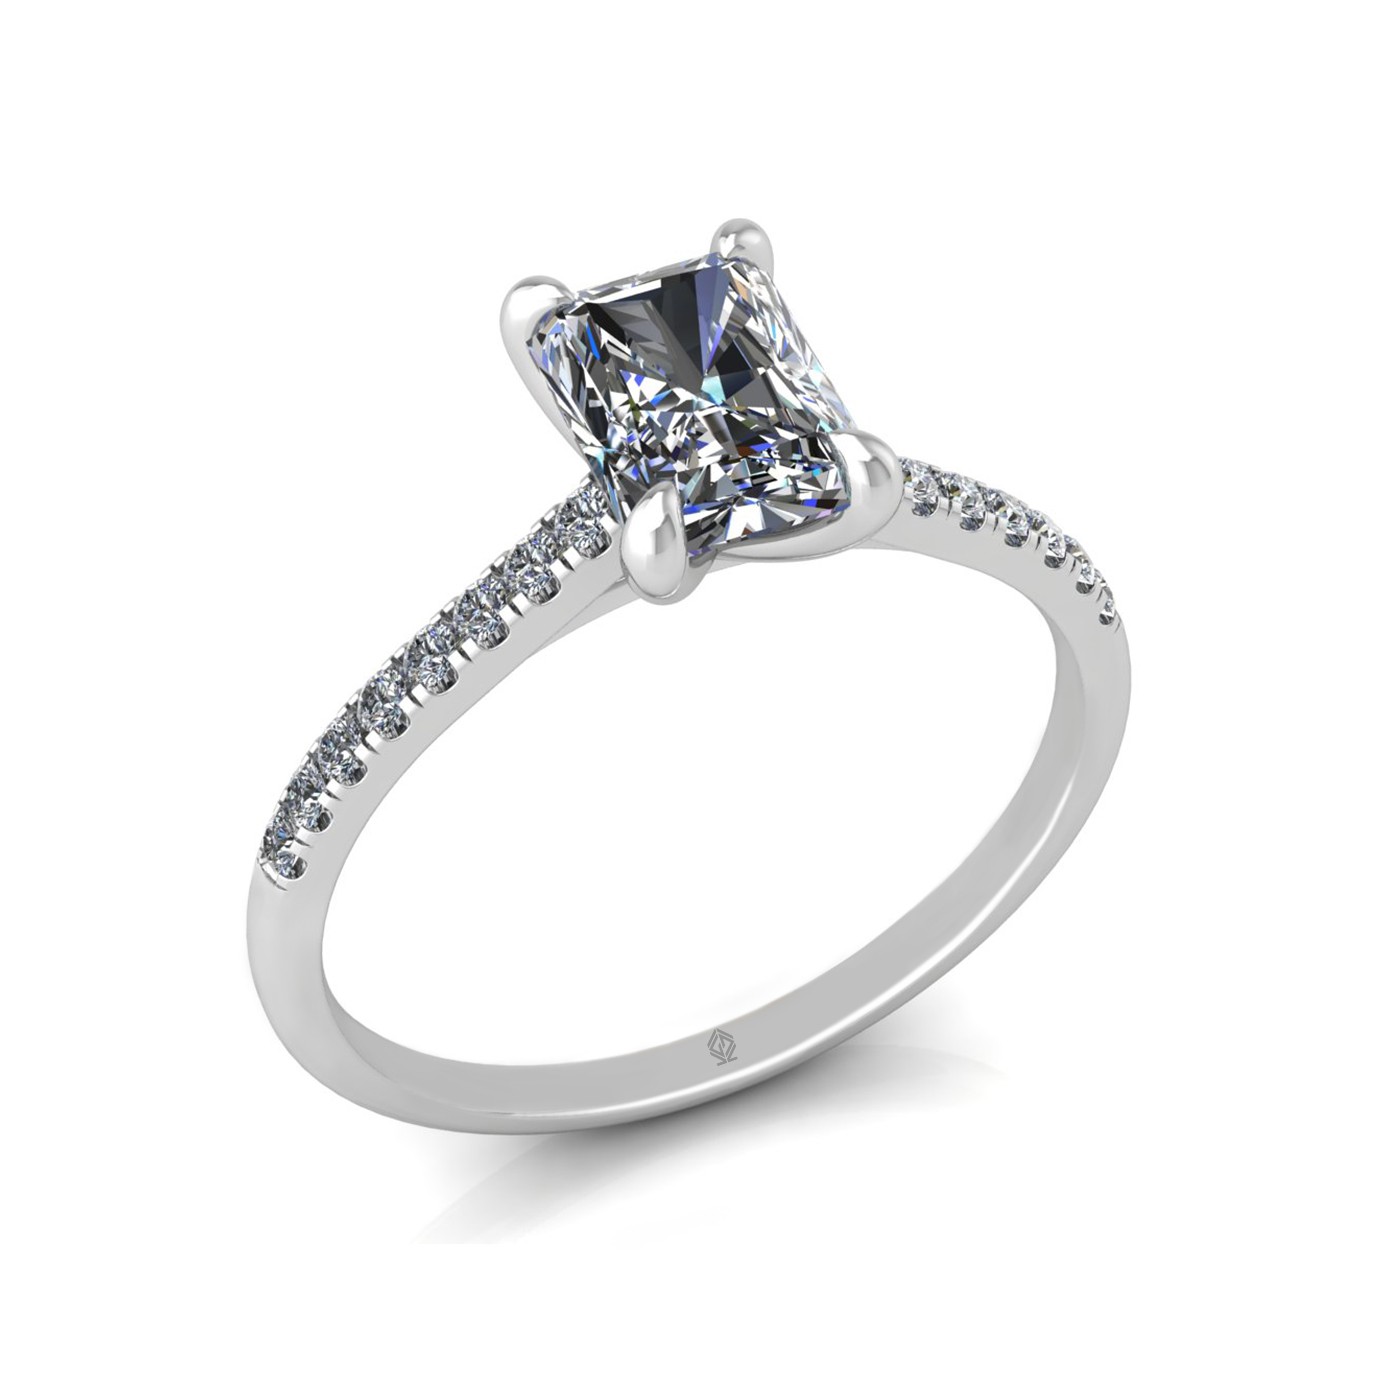 18k white gold  1,20 ct 4 prongs radiant cut diamond engagement ring with whisper thin pavÉ set band